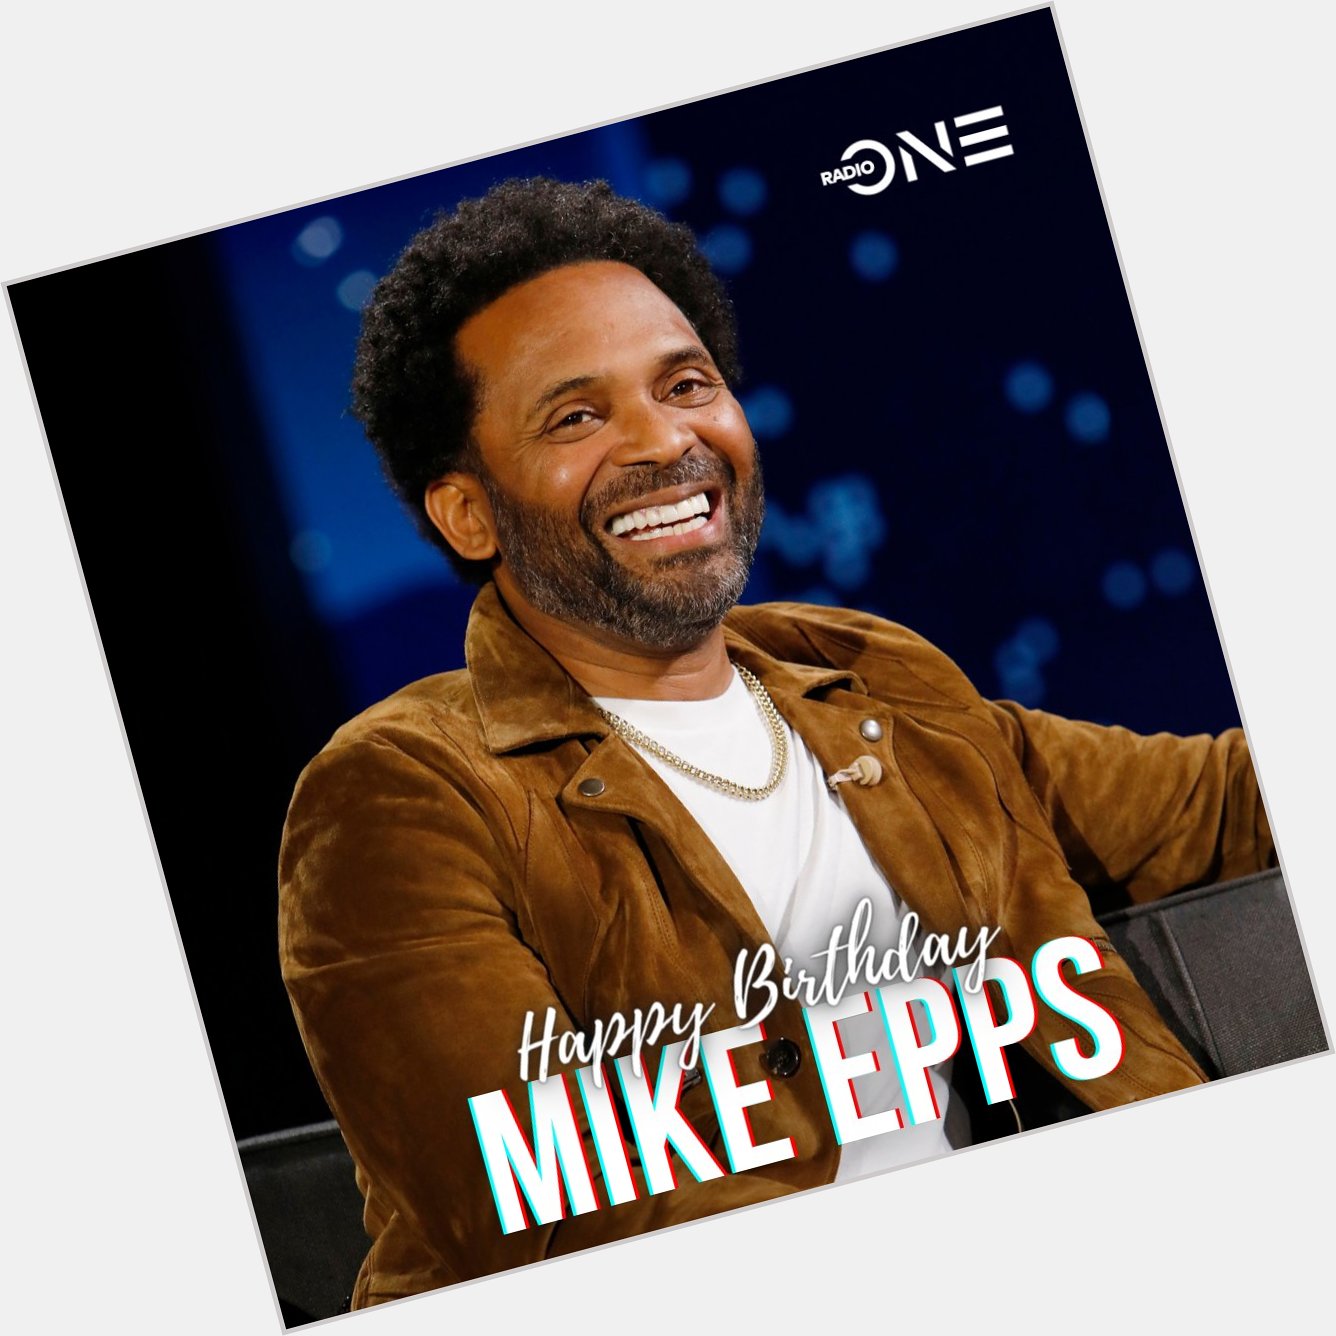 Happy birthday to comedian Mike Epps!  